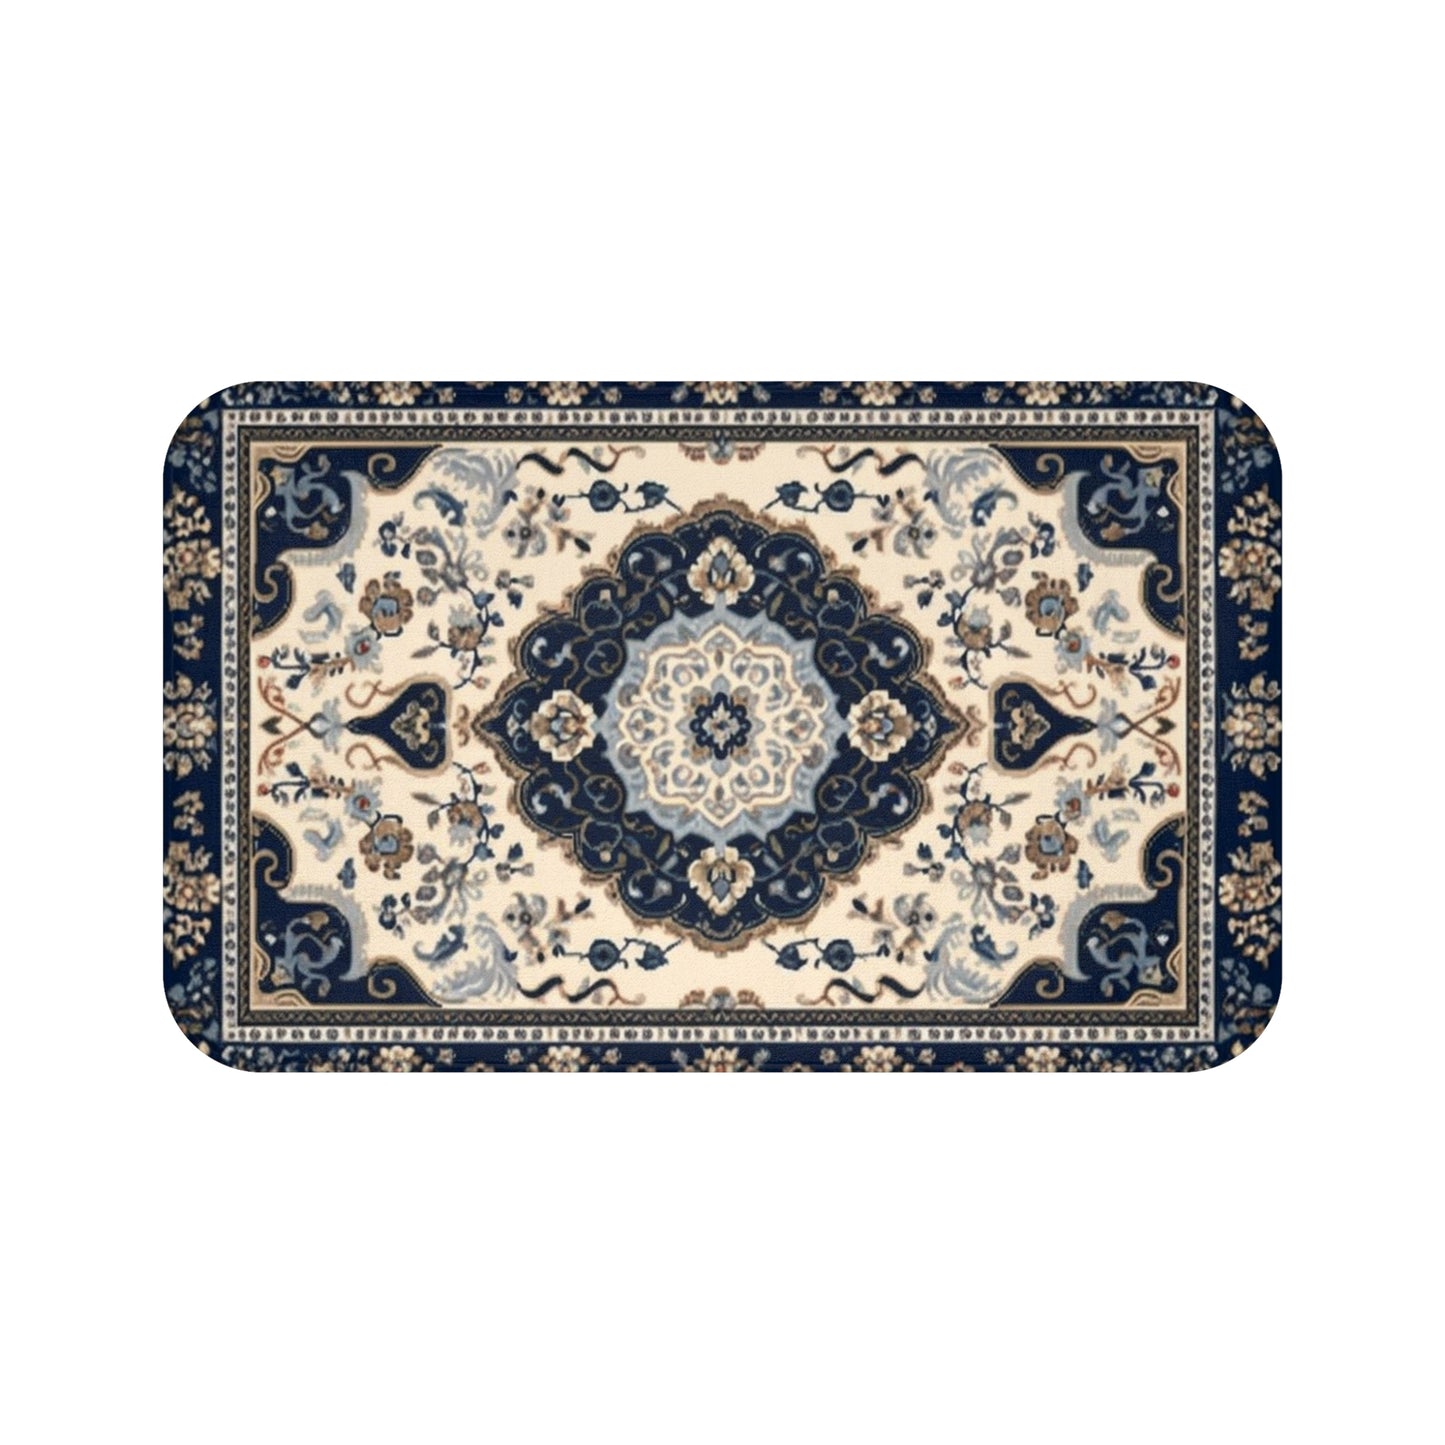 Luxurious Non-Slip Bath Mat - Soft and Absorbent Bathroom Rug for Comfort and Safety